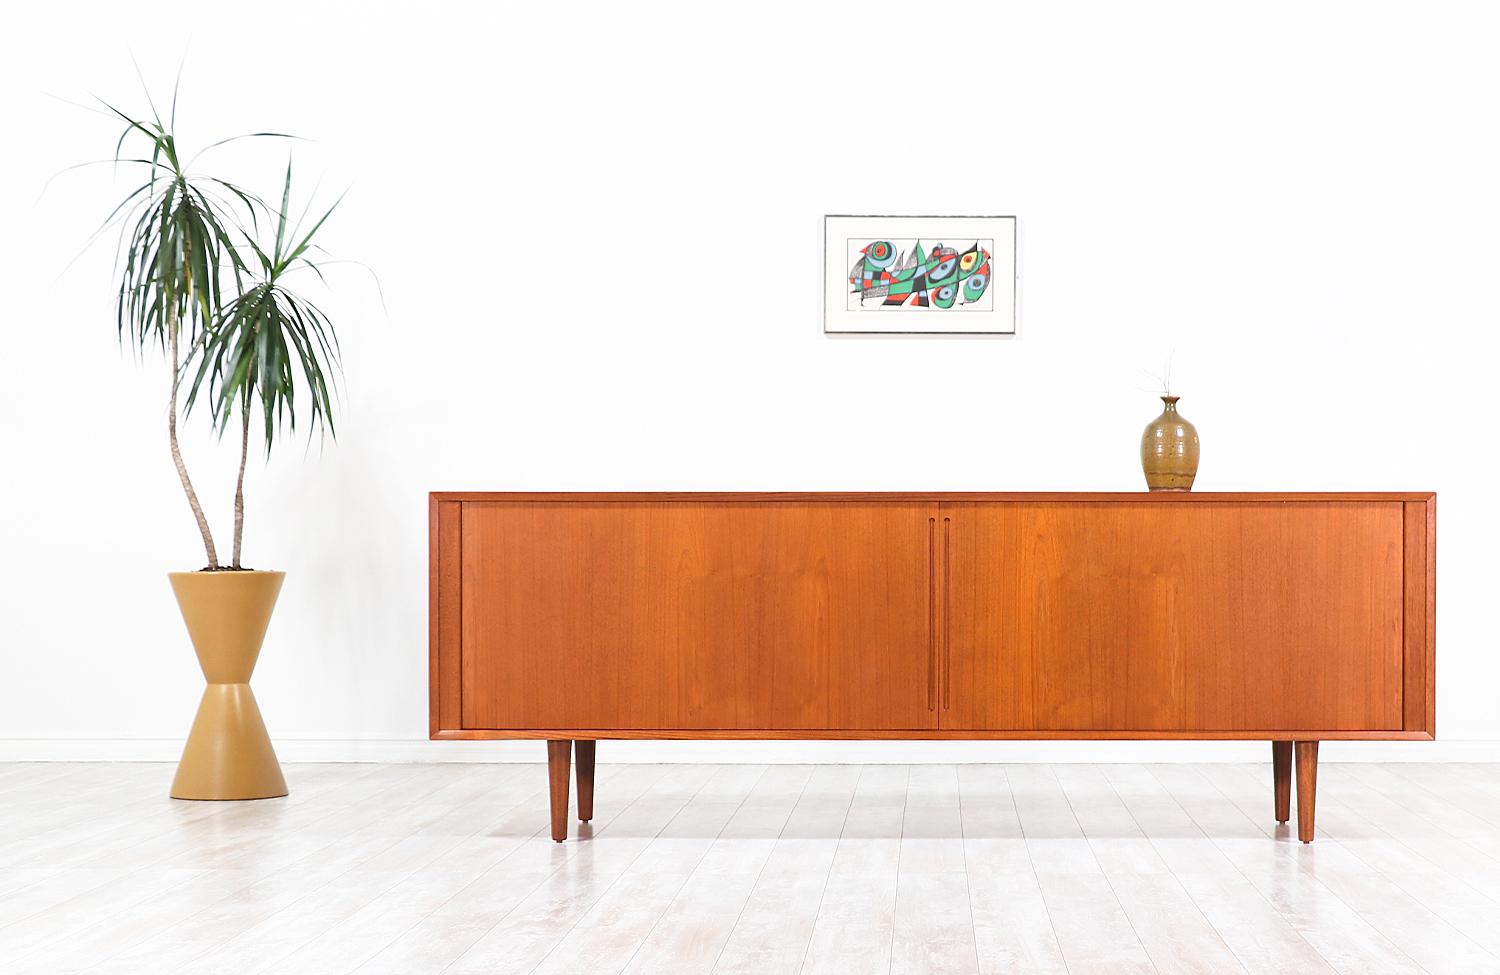 Minimalist modern credenza designed and manufactured in Denmark, circa 1960s. This long and low profile credenza features a teak wood construction with tambour doors and carved recessed handles. The doors slide smoothly on each side, revealing a